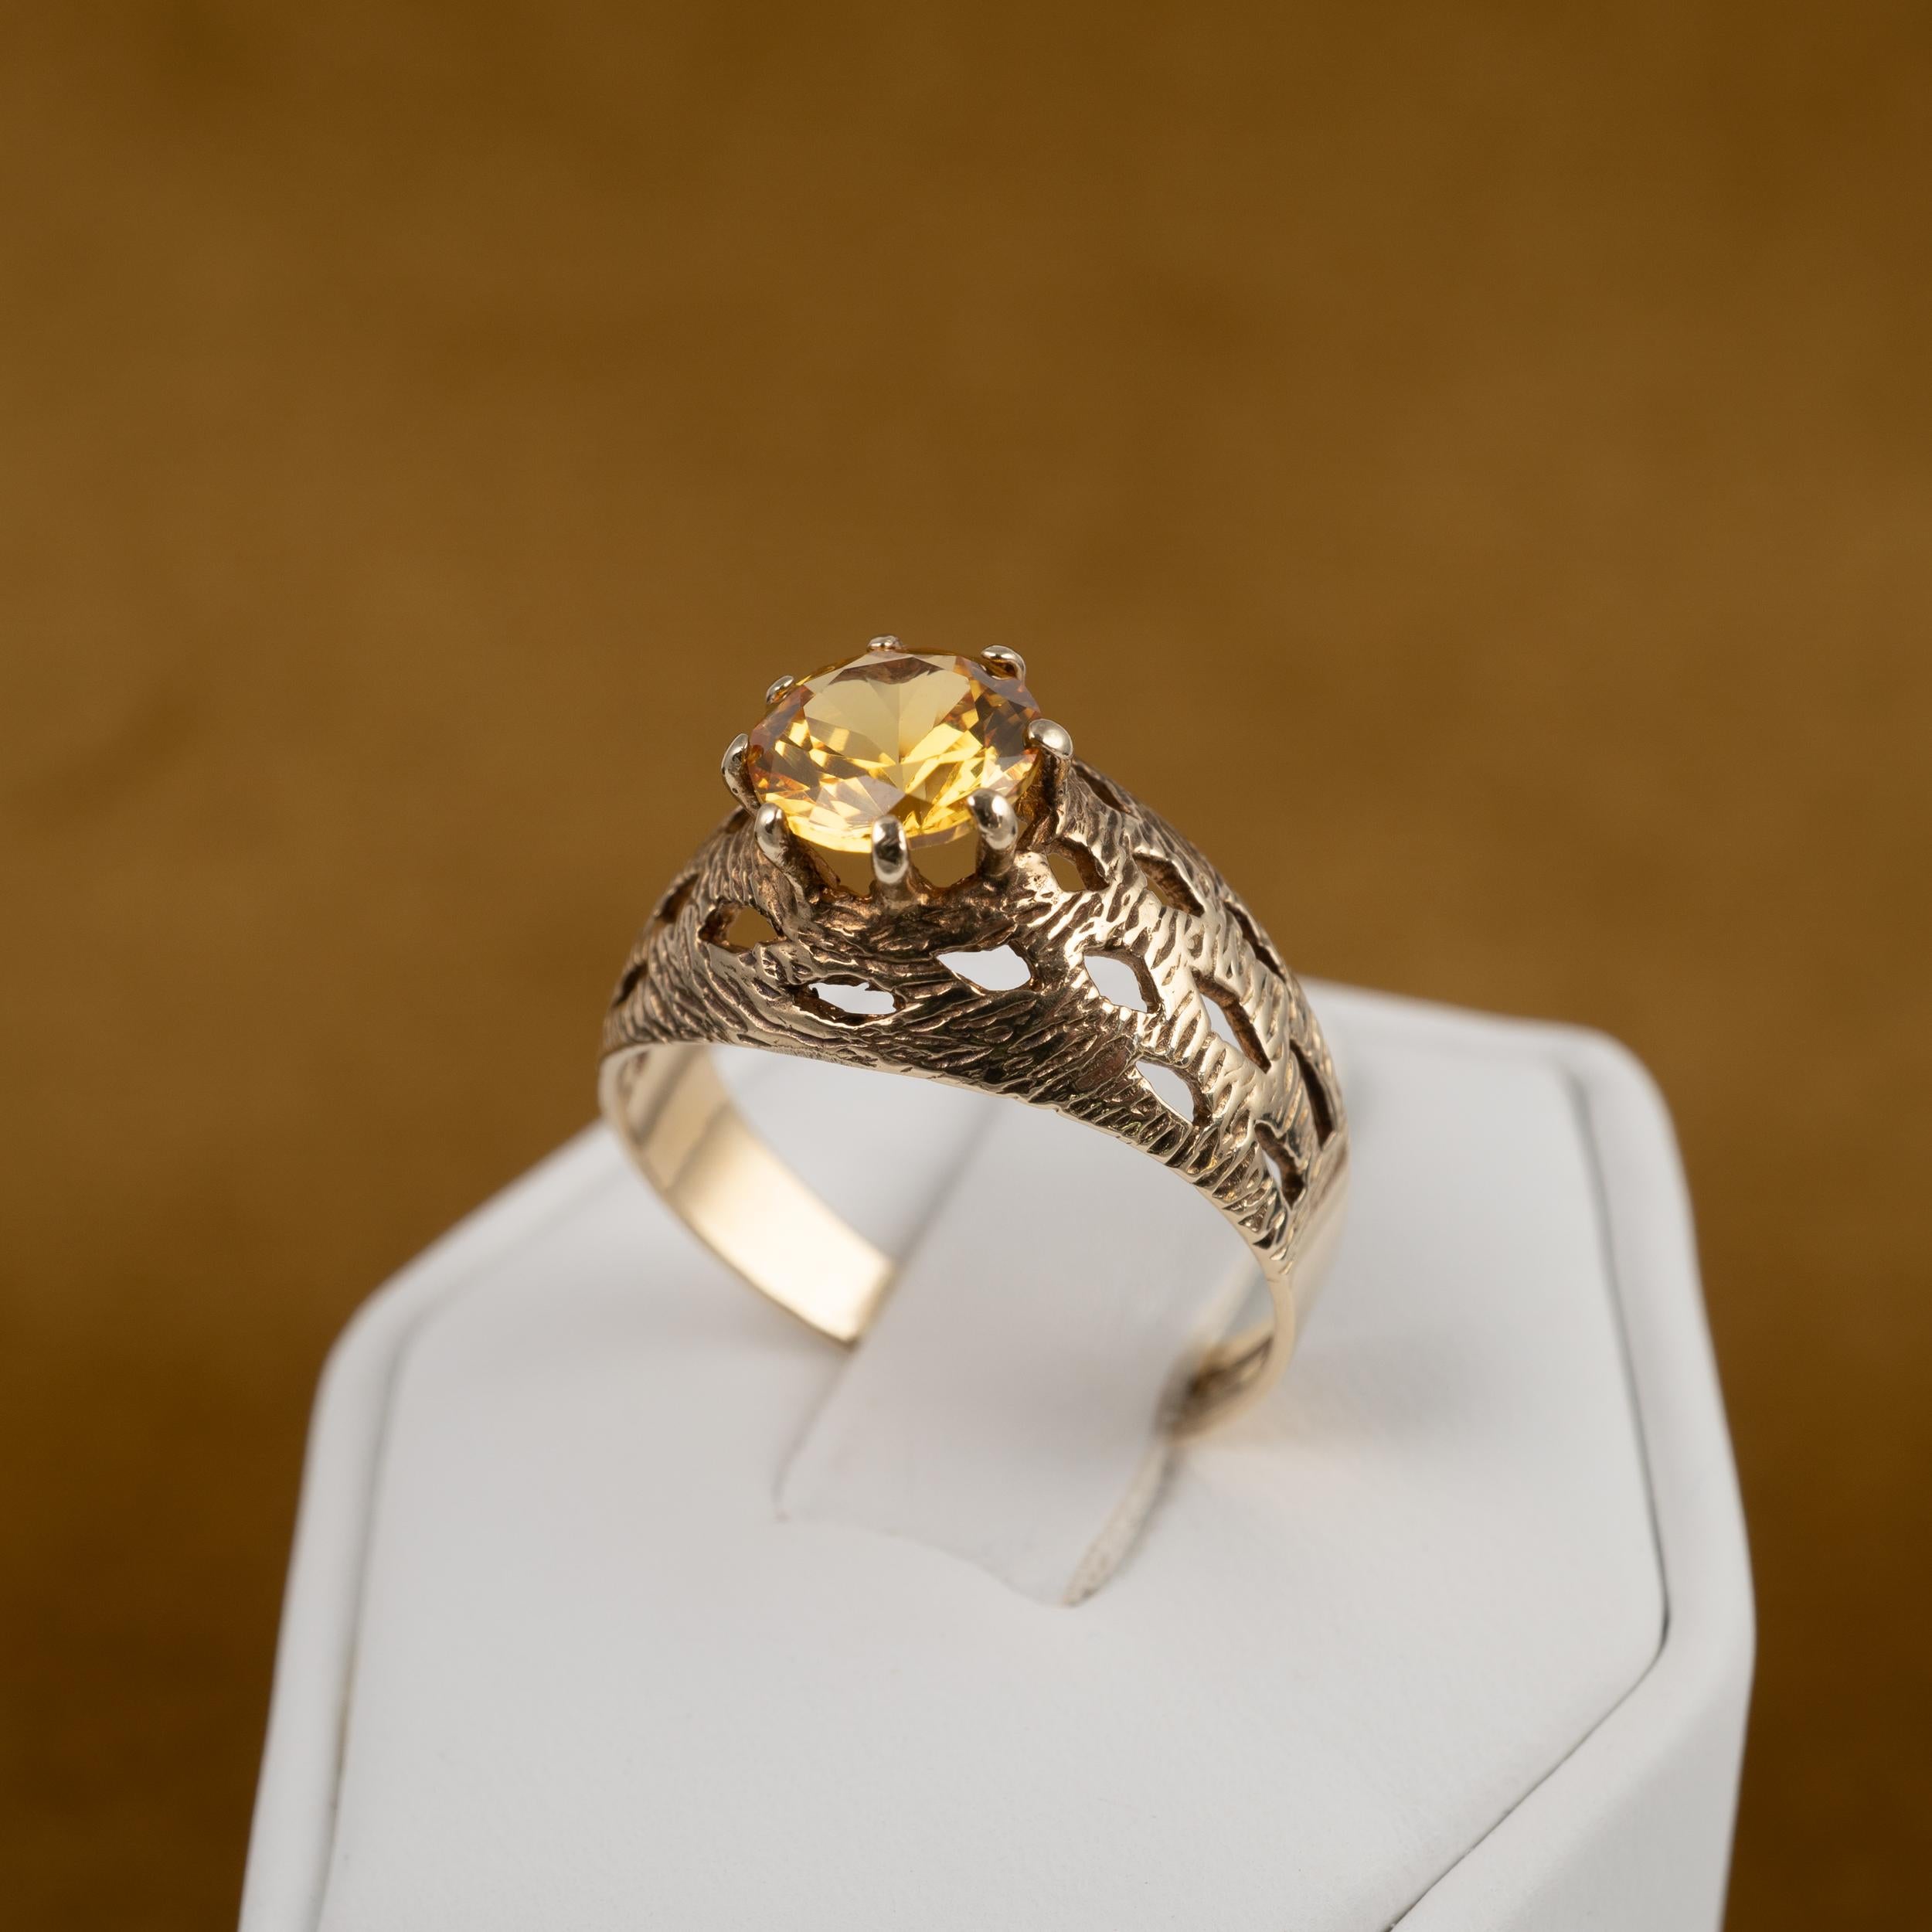 Vintage 19780s Chunky Citrine Solitaire Ring 9 Karat Gold Hallmark Dated 1974 In Good Condition For Sale In Preston, Lancashire